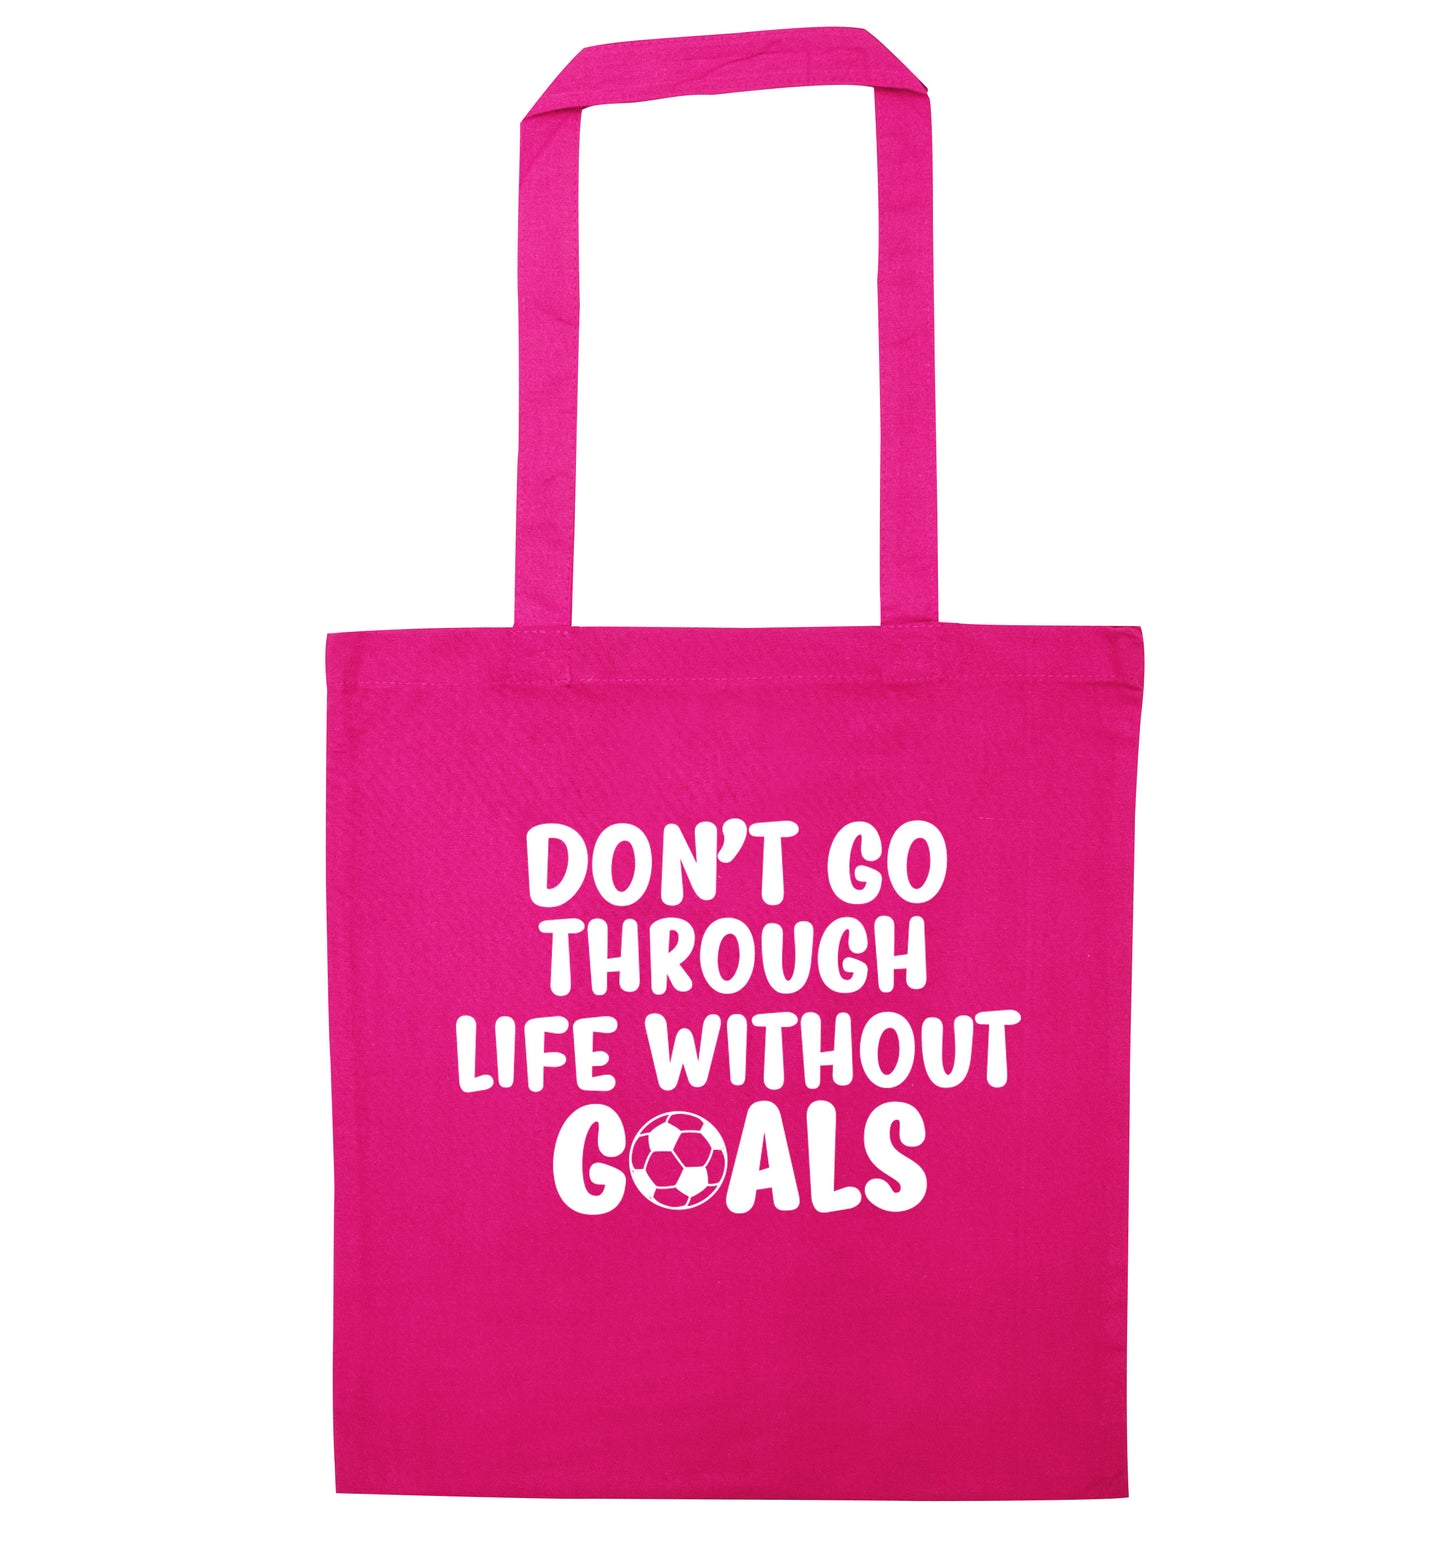 Don't go through life without goals pink tote bag